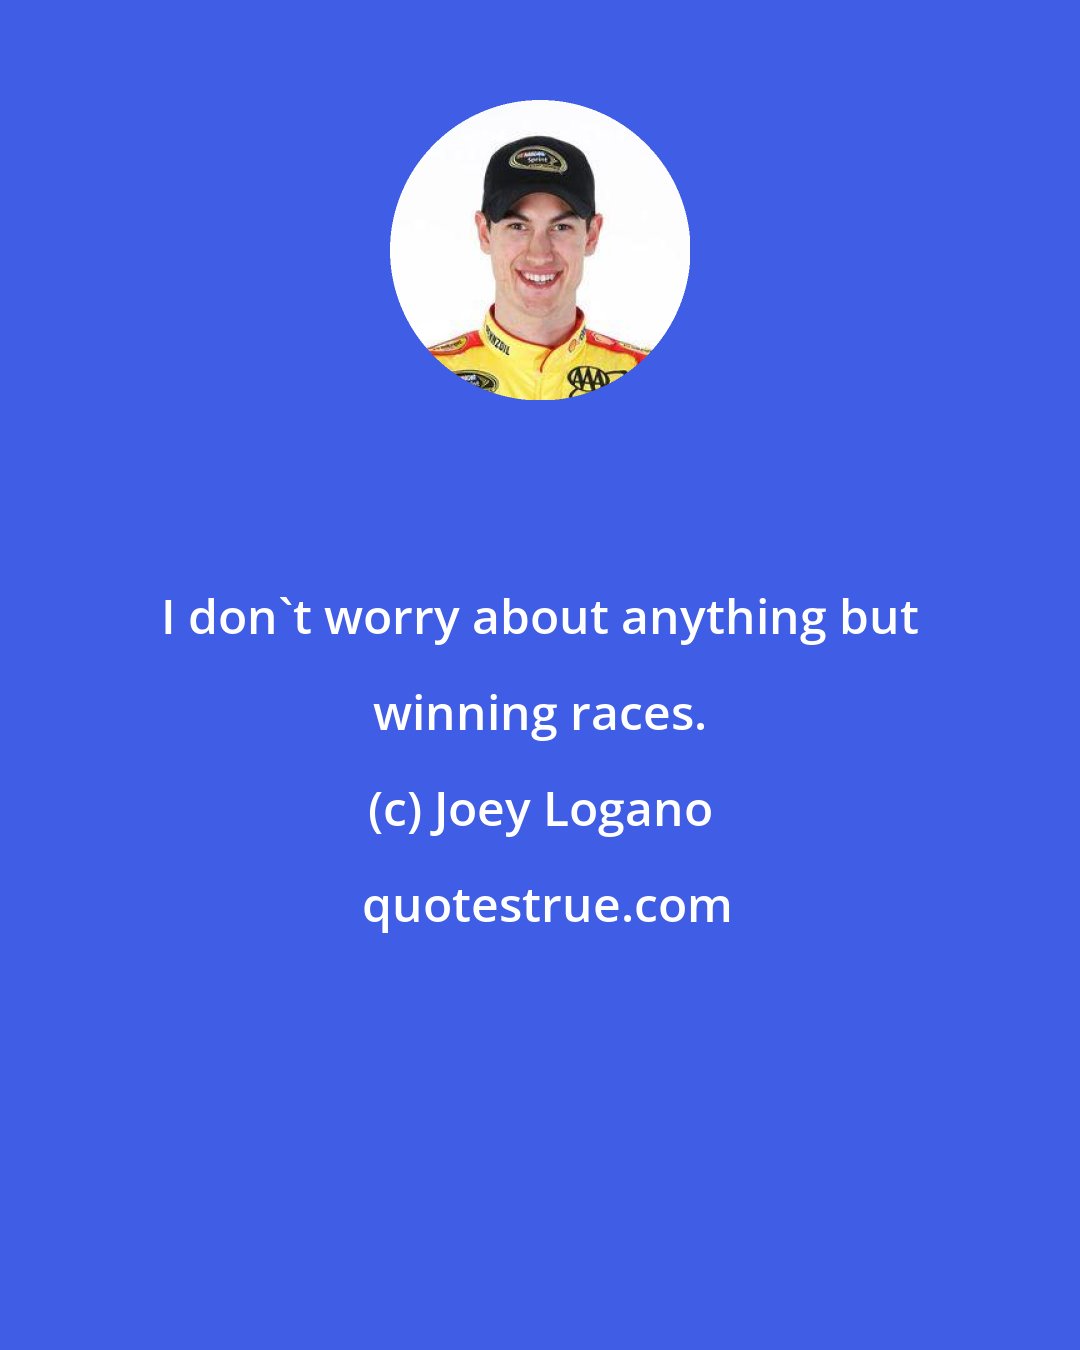 Joey Logano: I don't worry about anything but winning races.